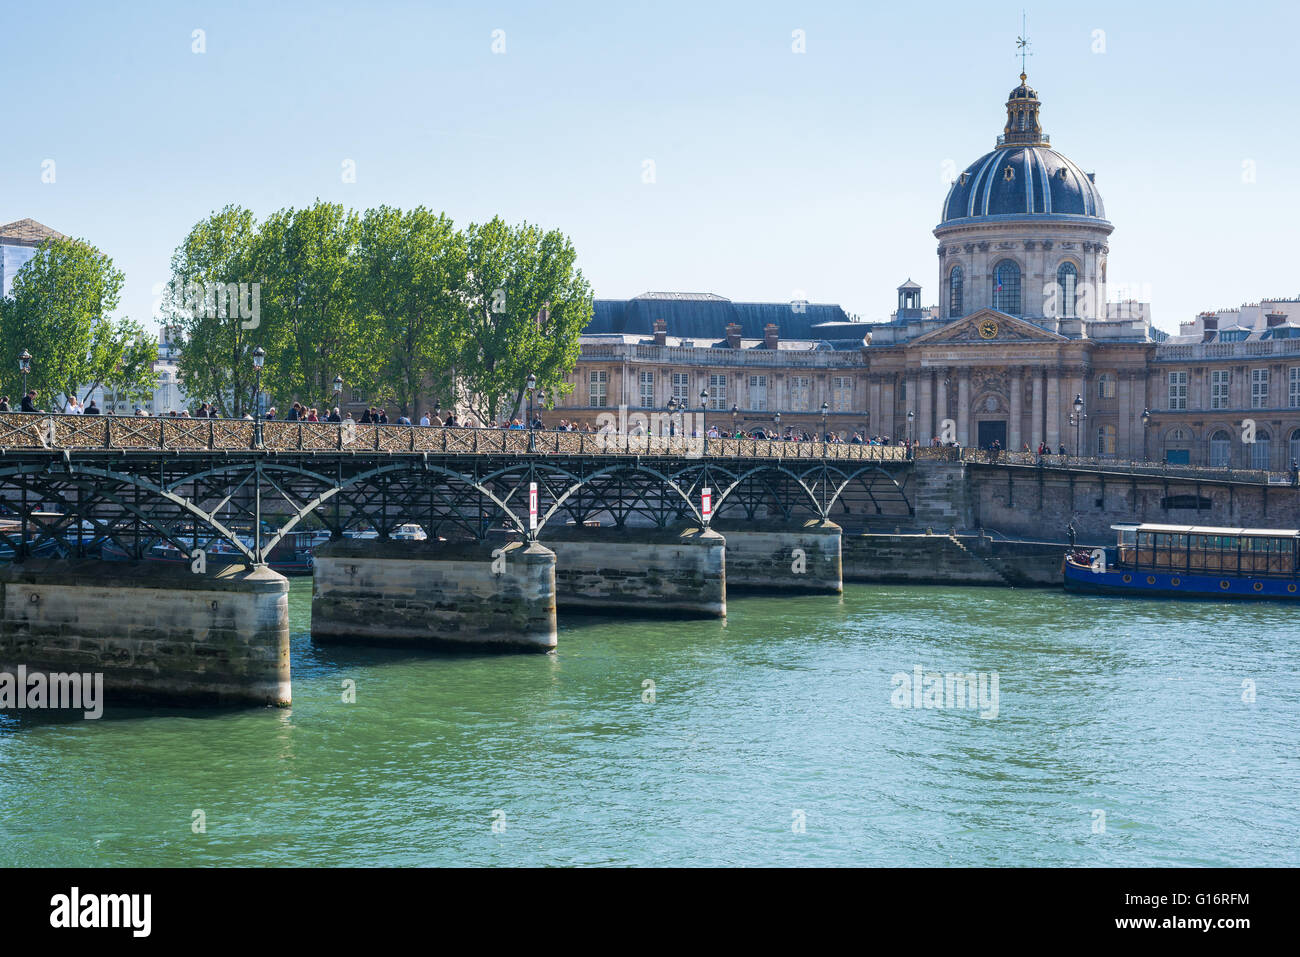 Pedestrians on the Pont des Arts, Paris, it's railings covered in padlocks. Institute de France in the background. Stock Photo